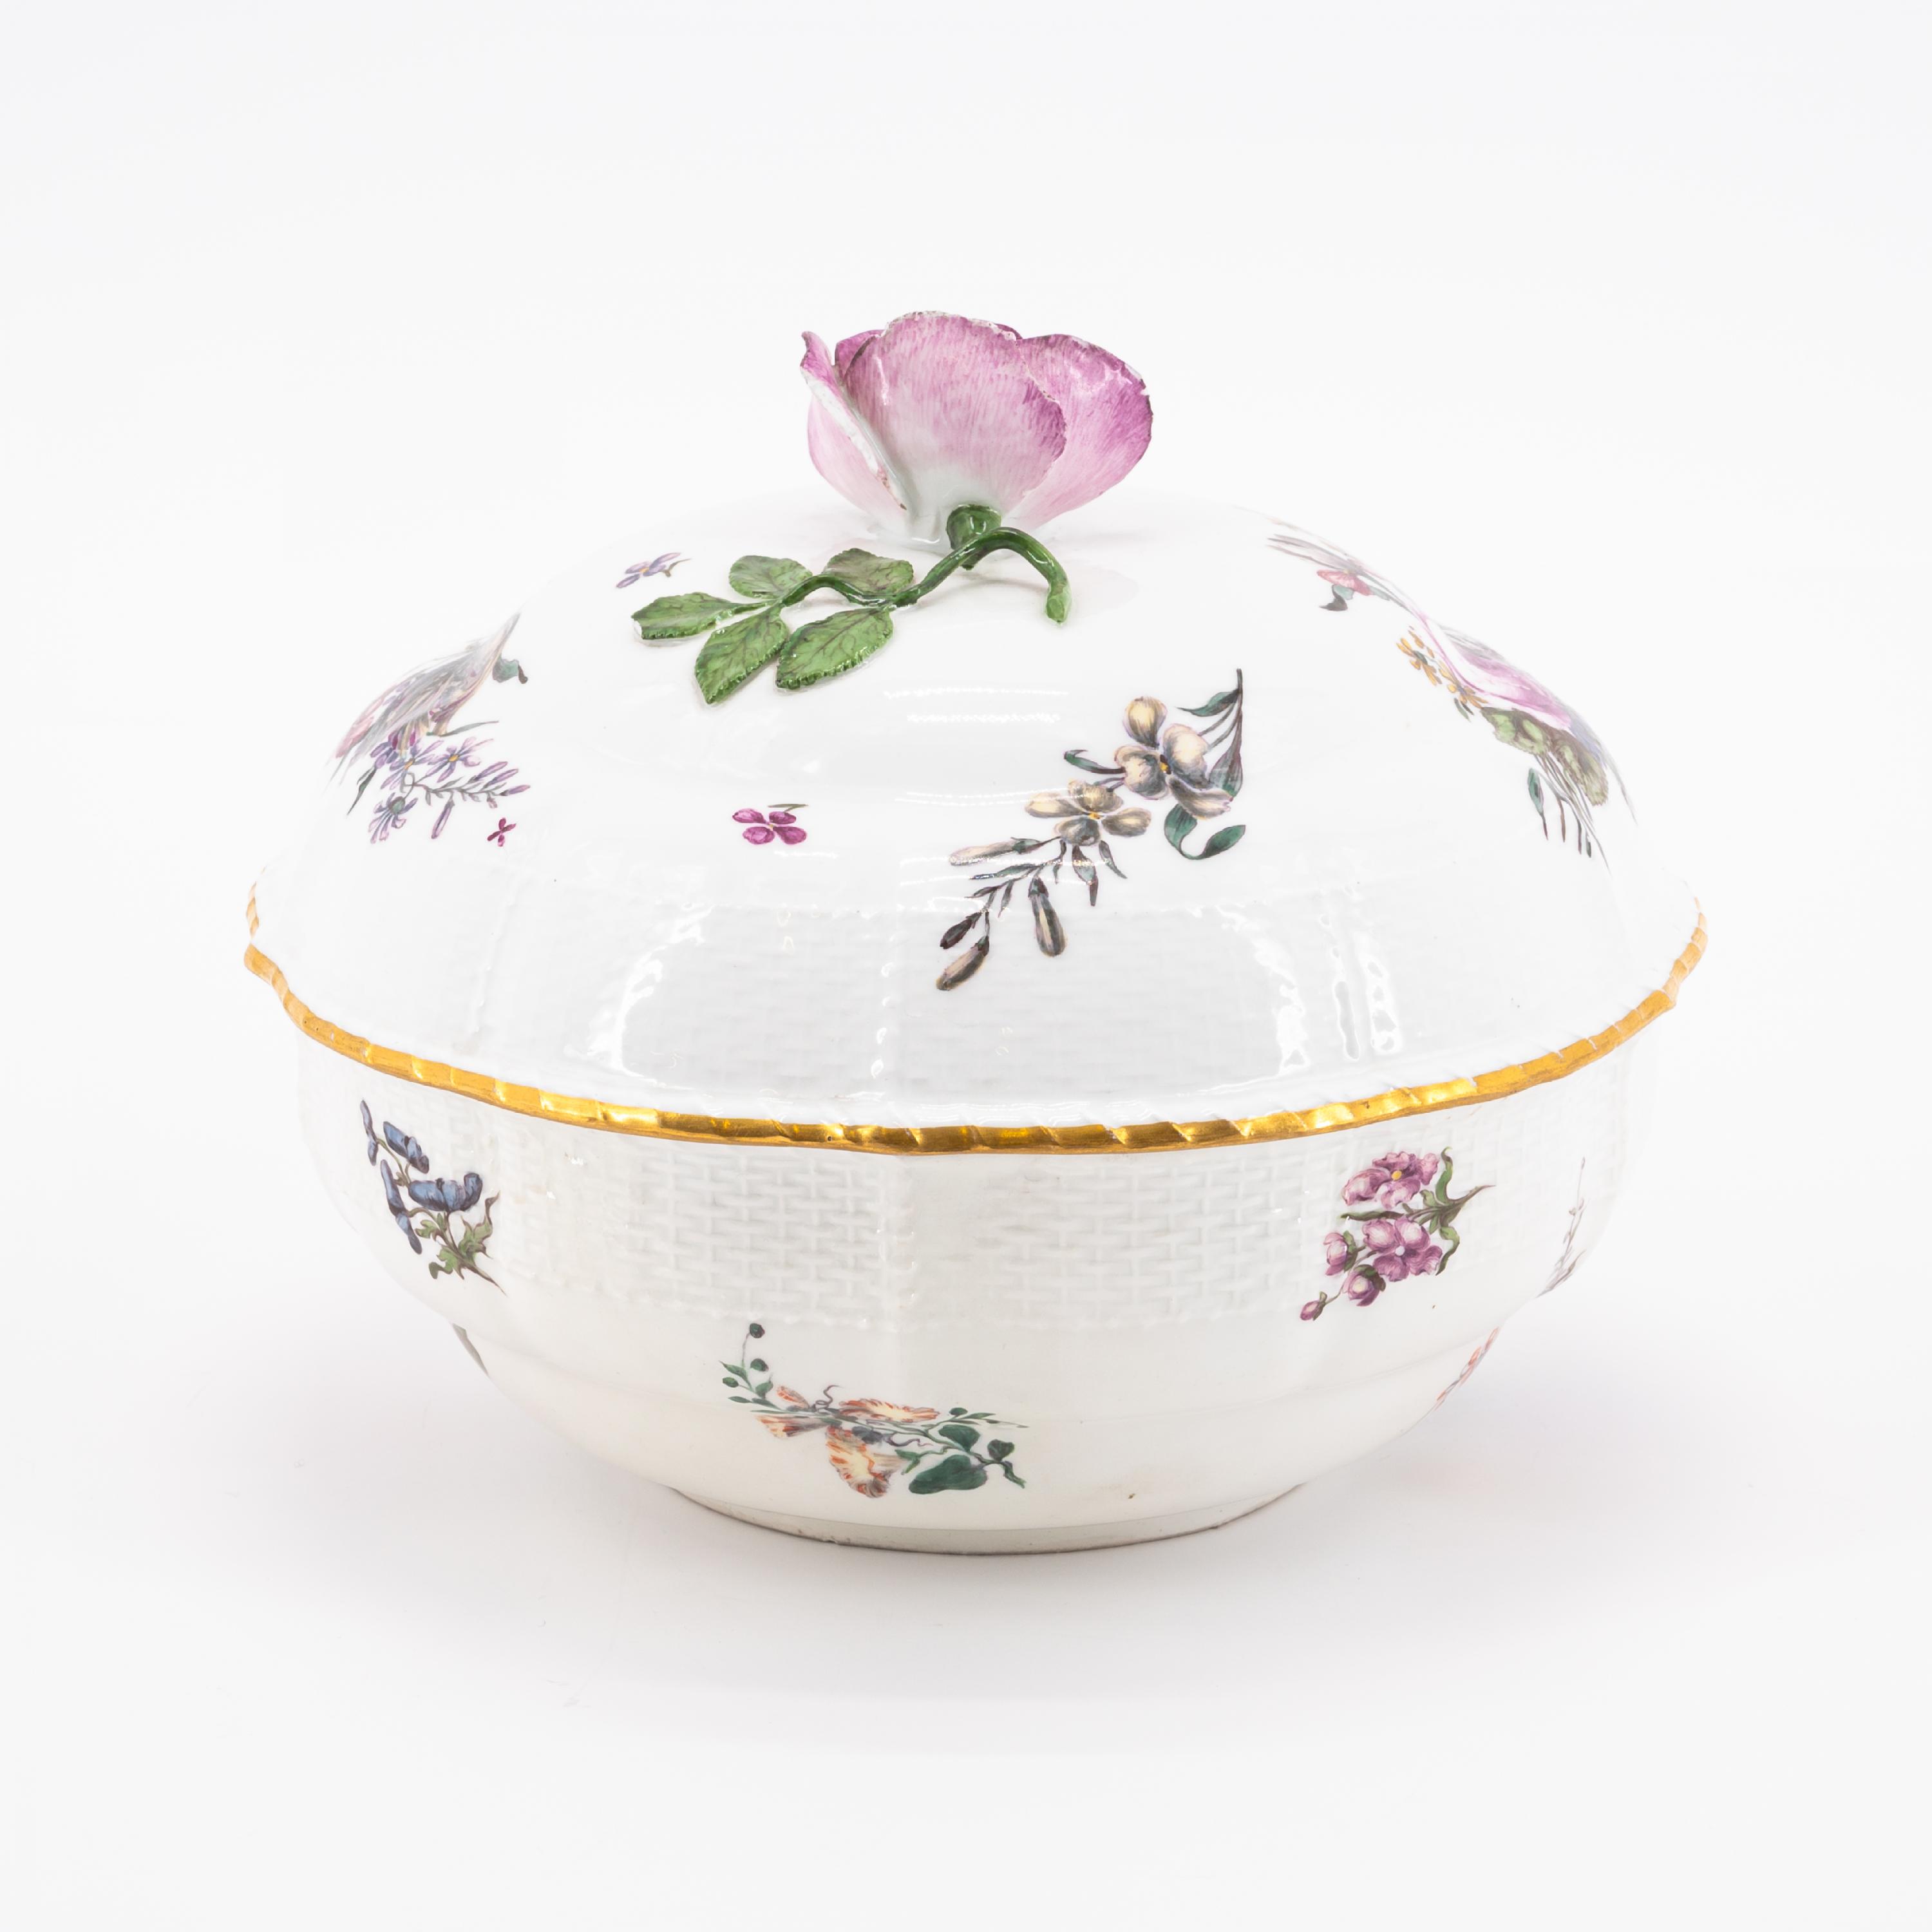 LARGE PORCELAIN LIDDED BOWL WITH FLOWER KNOB, SMALL TEA POT WITH WOODCUT FLOWERS AND CUP WITH SAUCER - Image 2 of 18